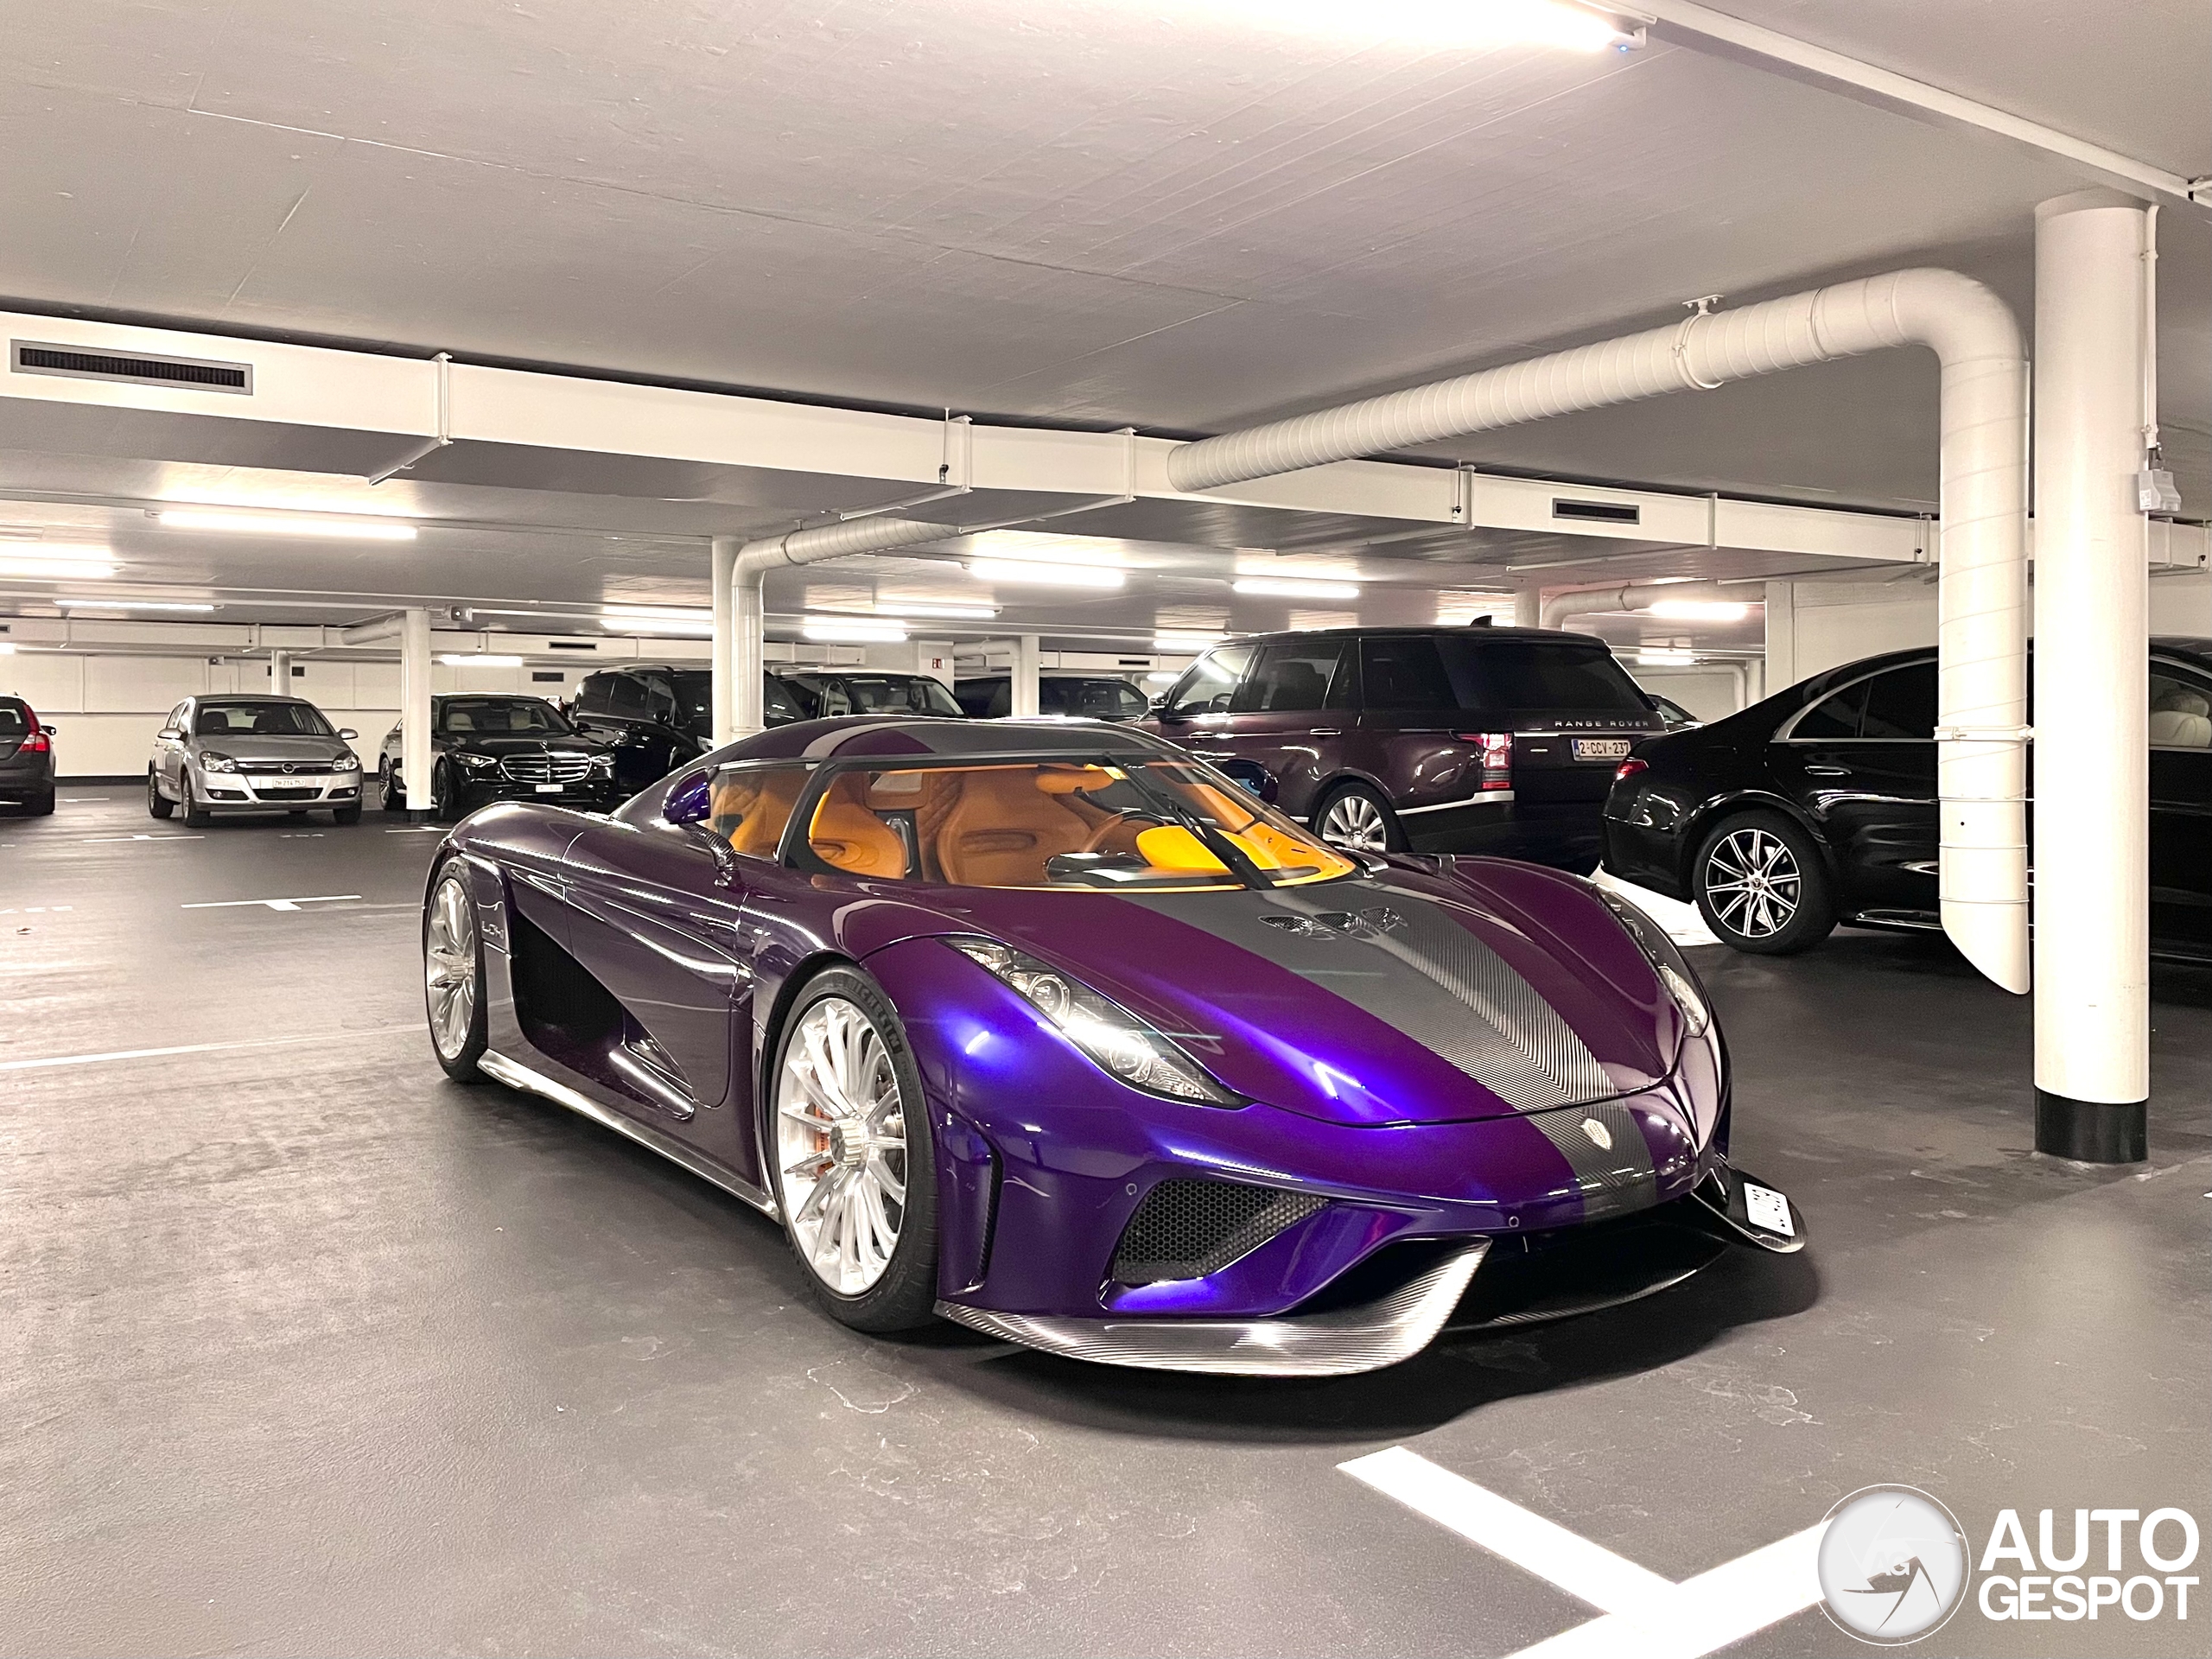 It's not the first time a hypercar has been parked in this garage